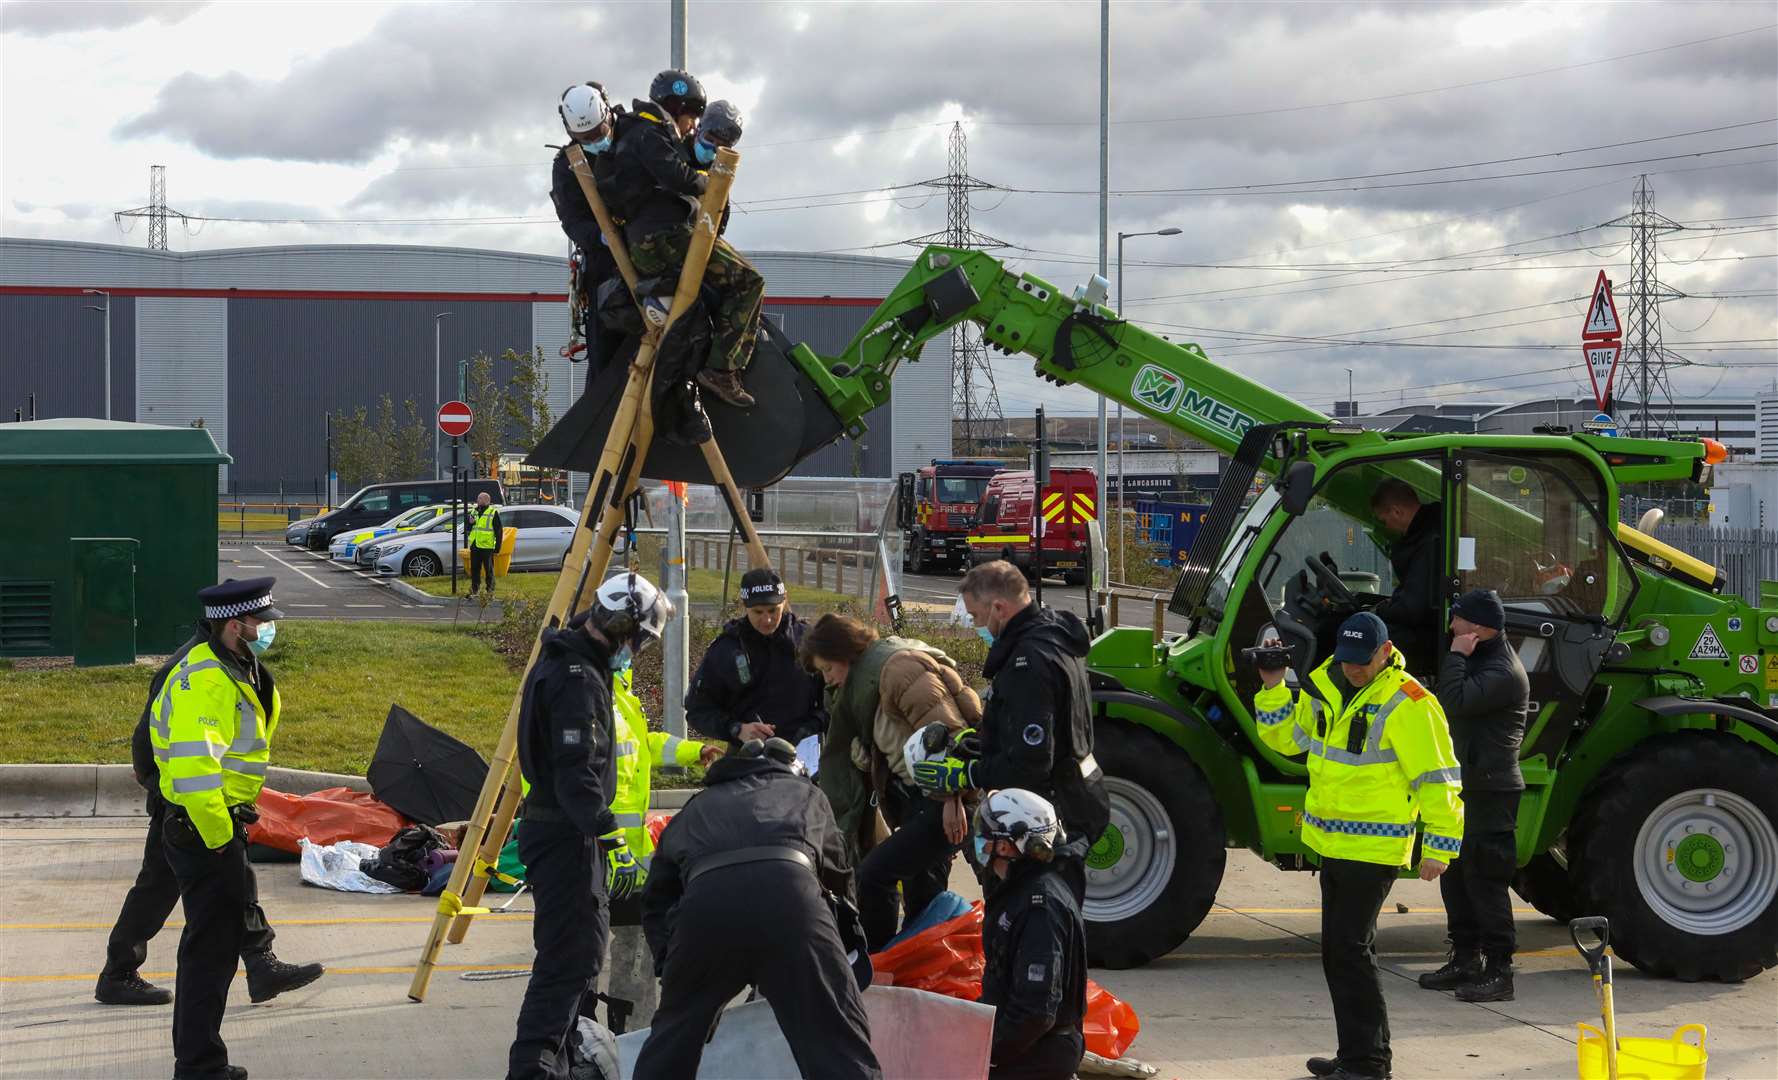 Police with Extinction Rebellion protest at the Amazon Dartford warehouse last year. Photo: UKNIP